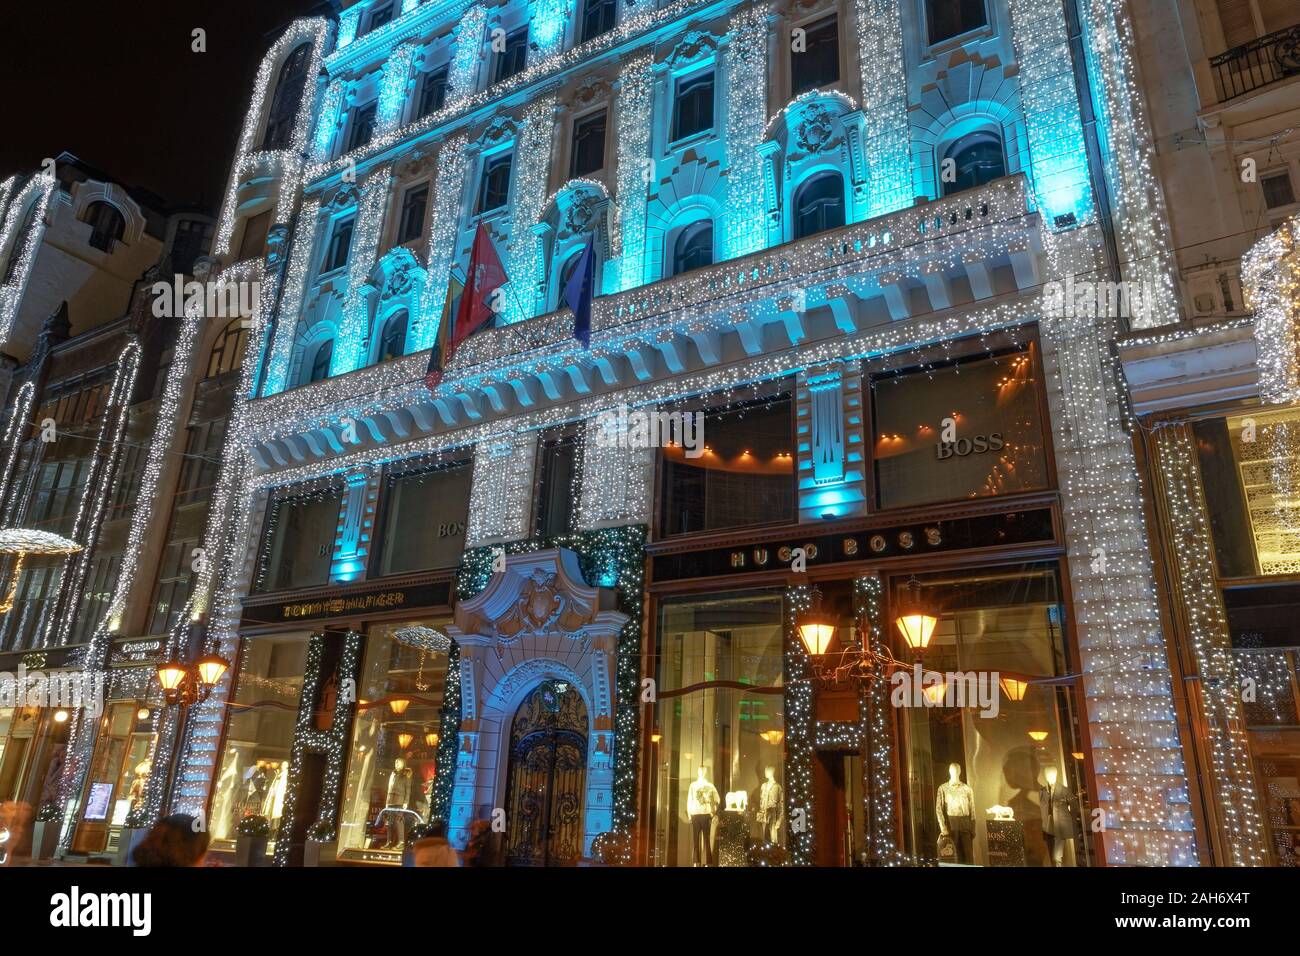 Budapest, Hungary night view of Fashion Street with festive decorations &  illuminated window displays of Hugo Boss and Tommy Hilfiger stores Stock  Photo - Alamy